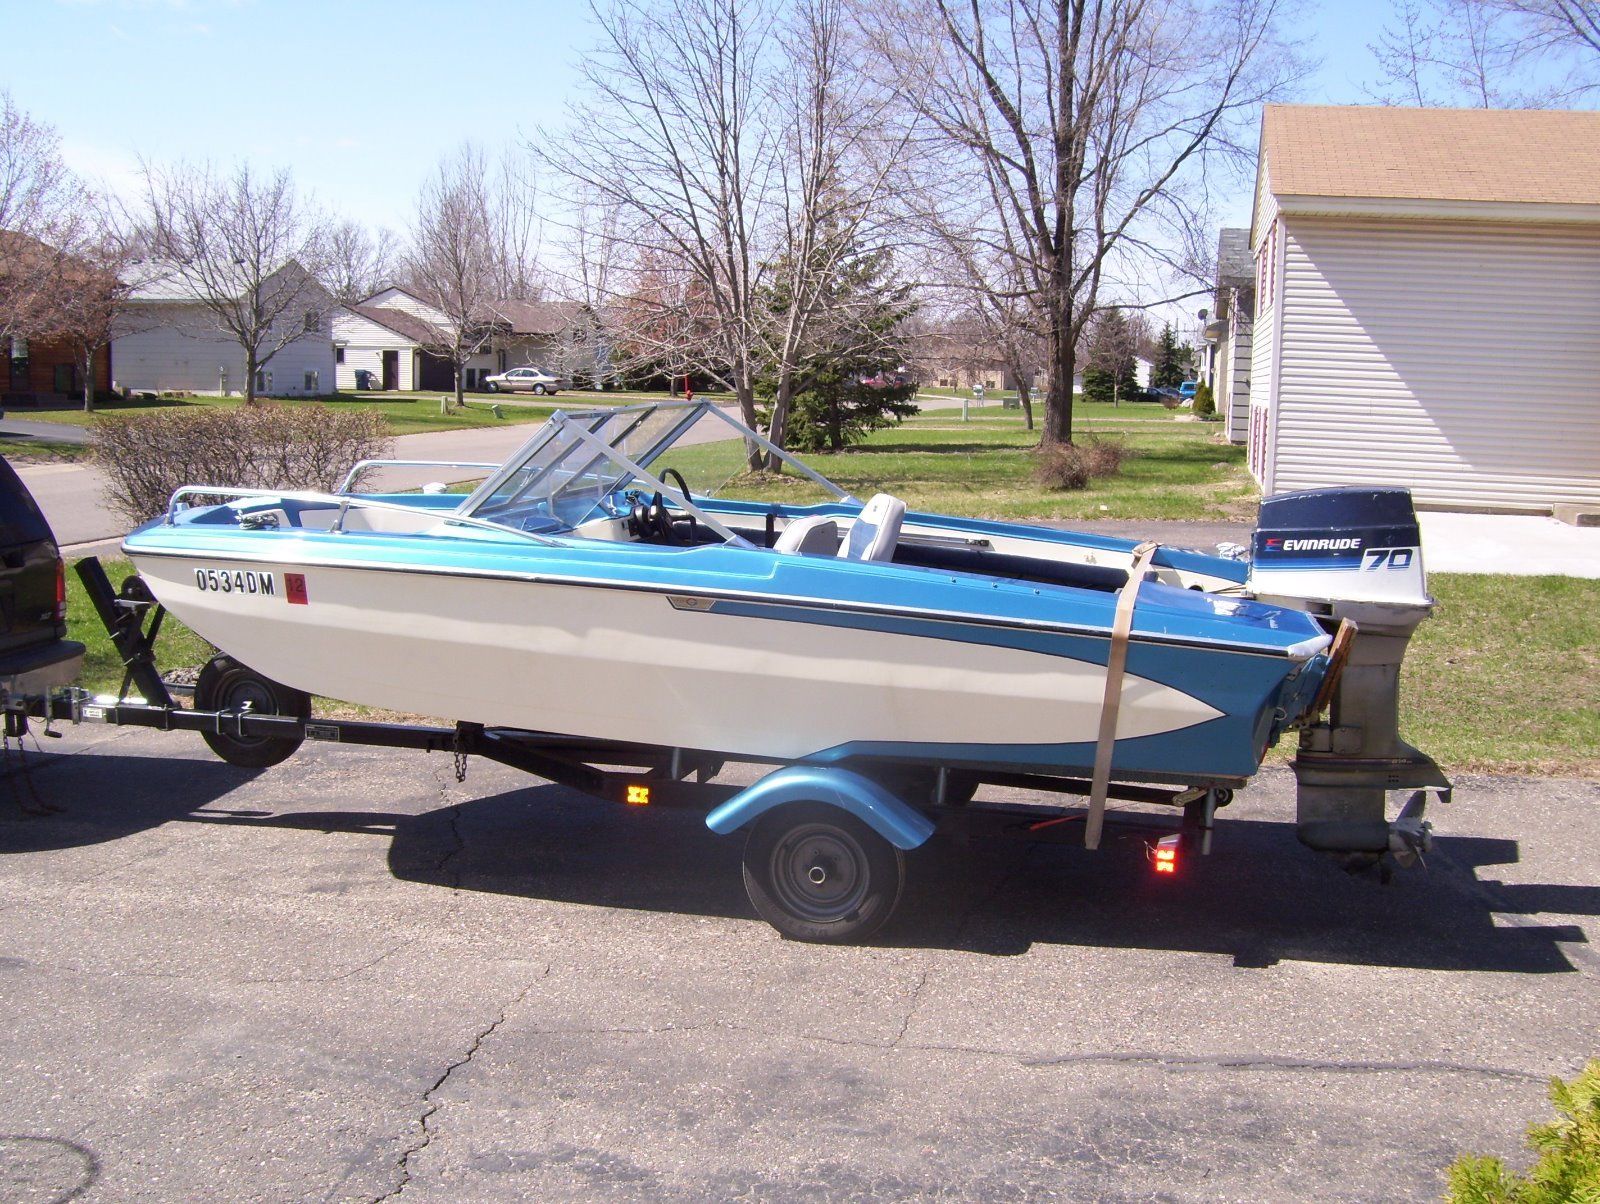 Glastron 1975 for sale for $995 - Boats-from-USA.com